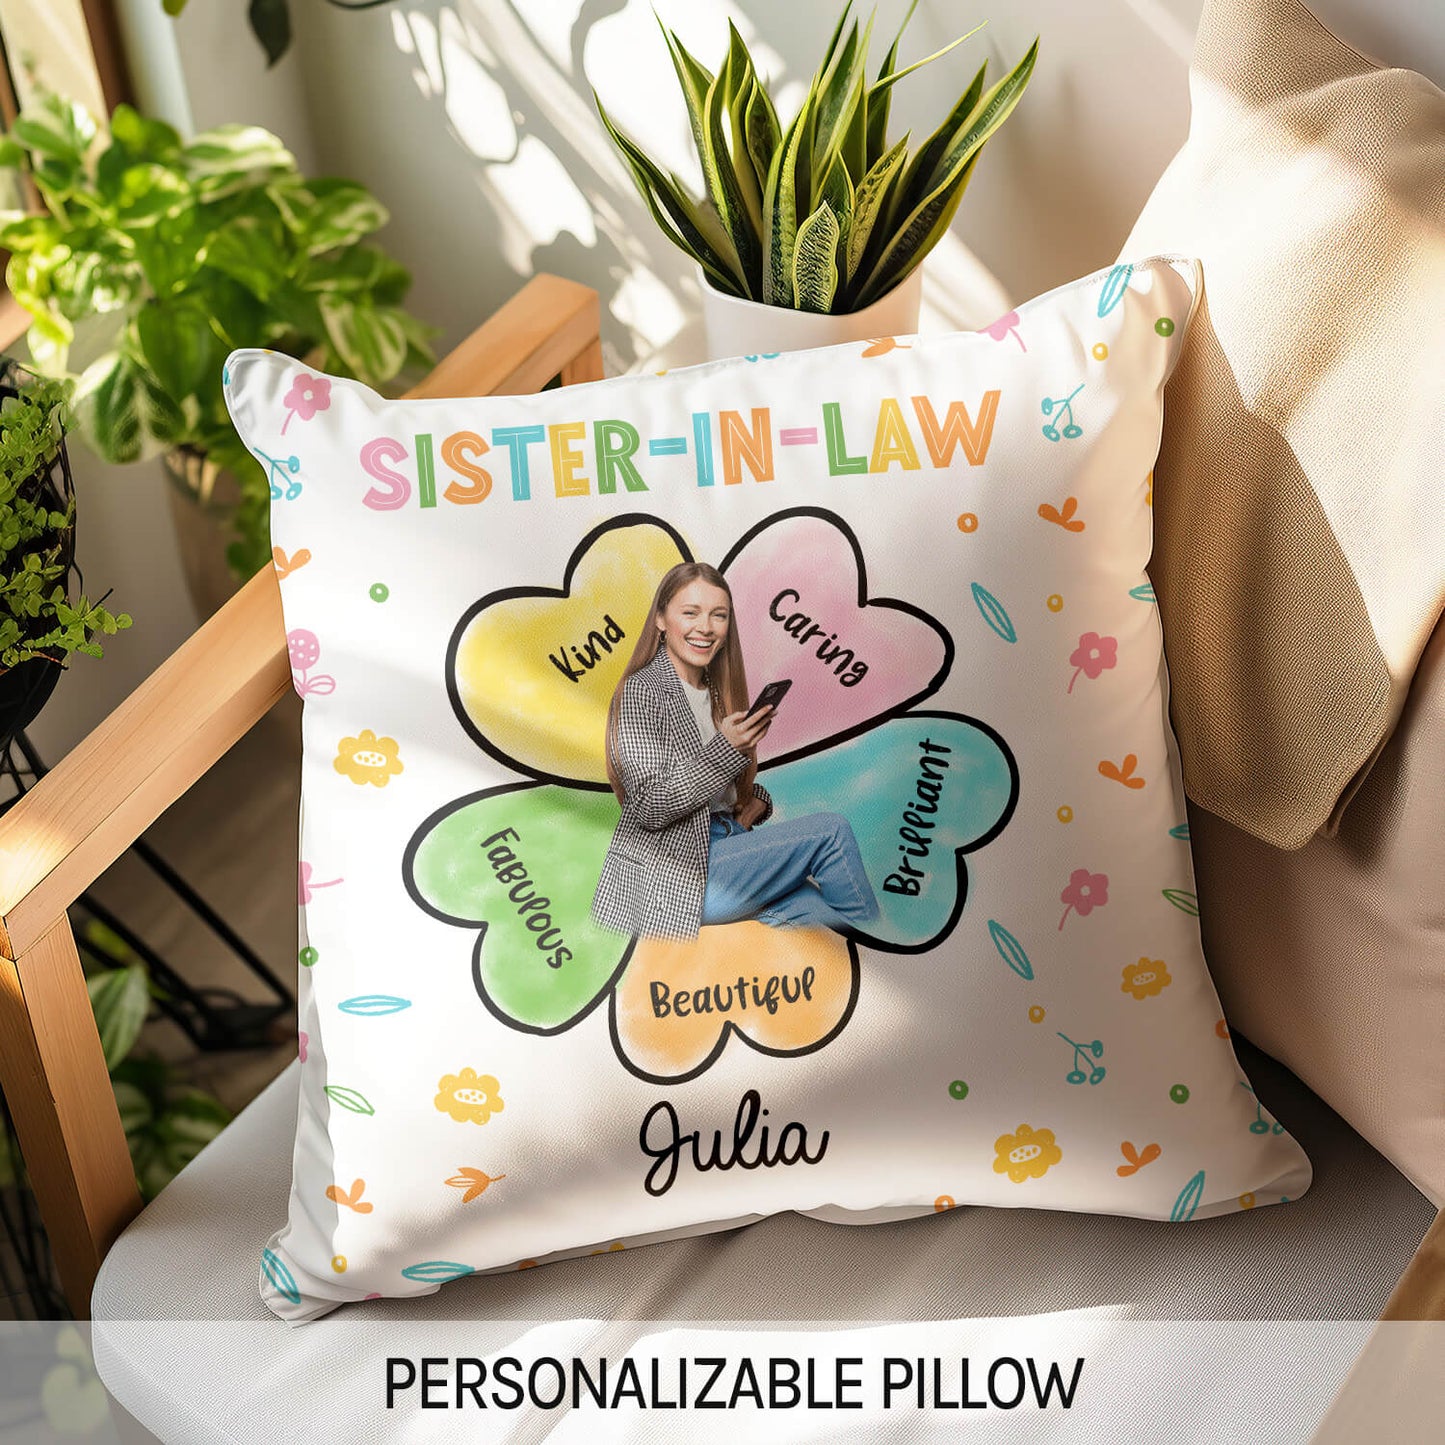 Sister-in-law - Personalized Birthday or Christmas gift For Sister In Law - Custom Pillow - MyMindfulGifts